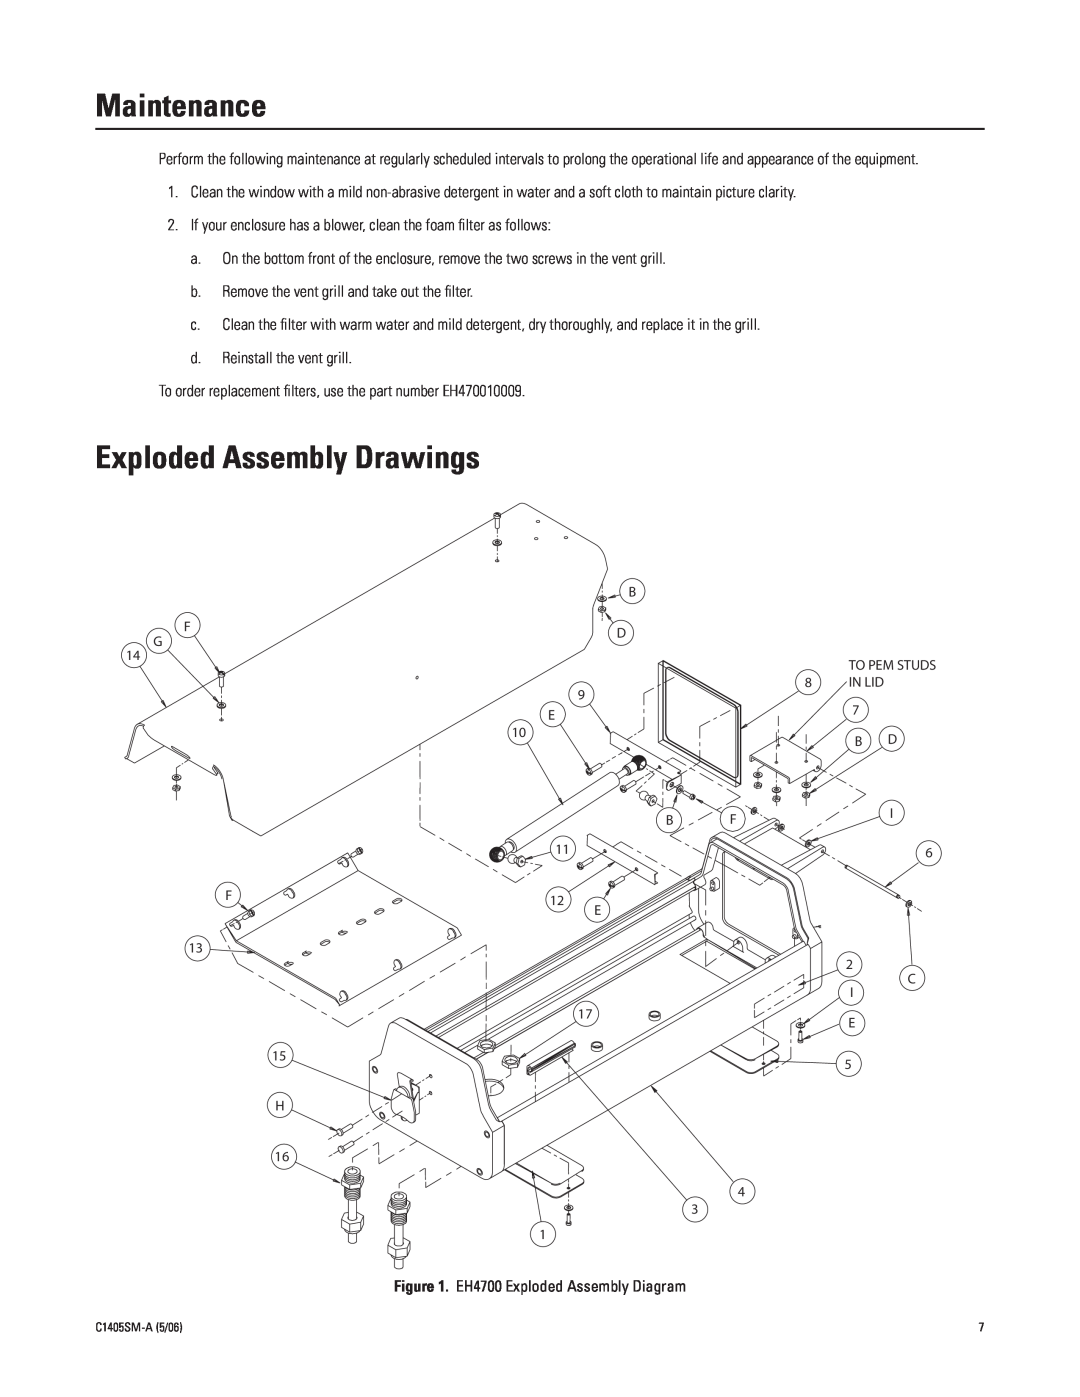 Pelco EH4700 Series manual Maintenance, Exploded Assembly Drawings 